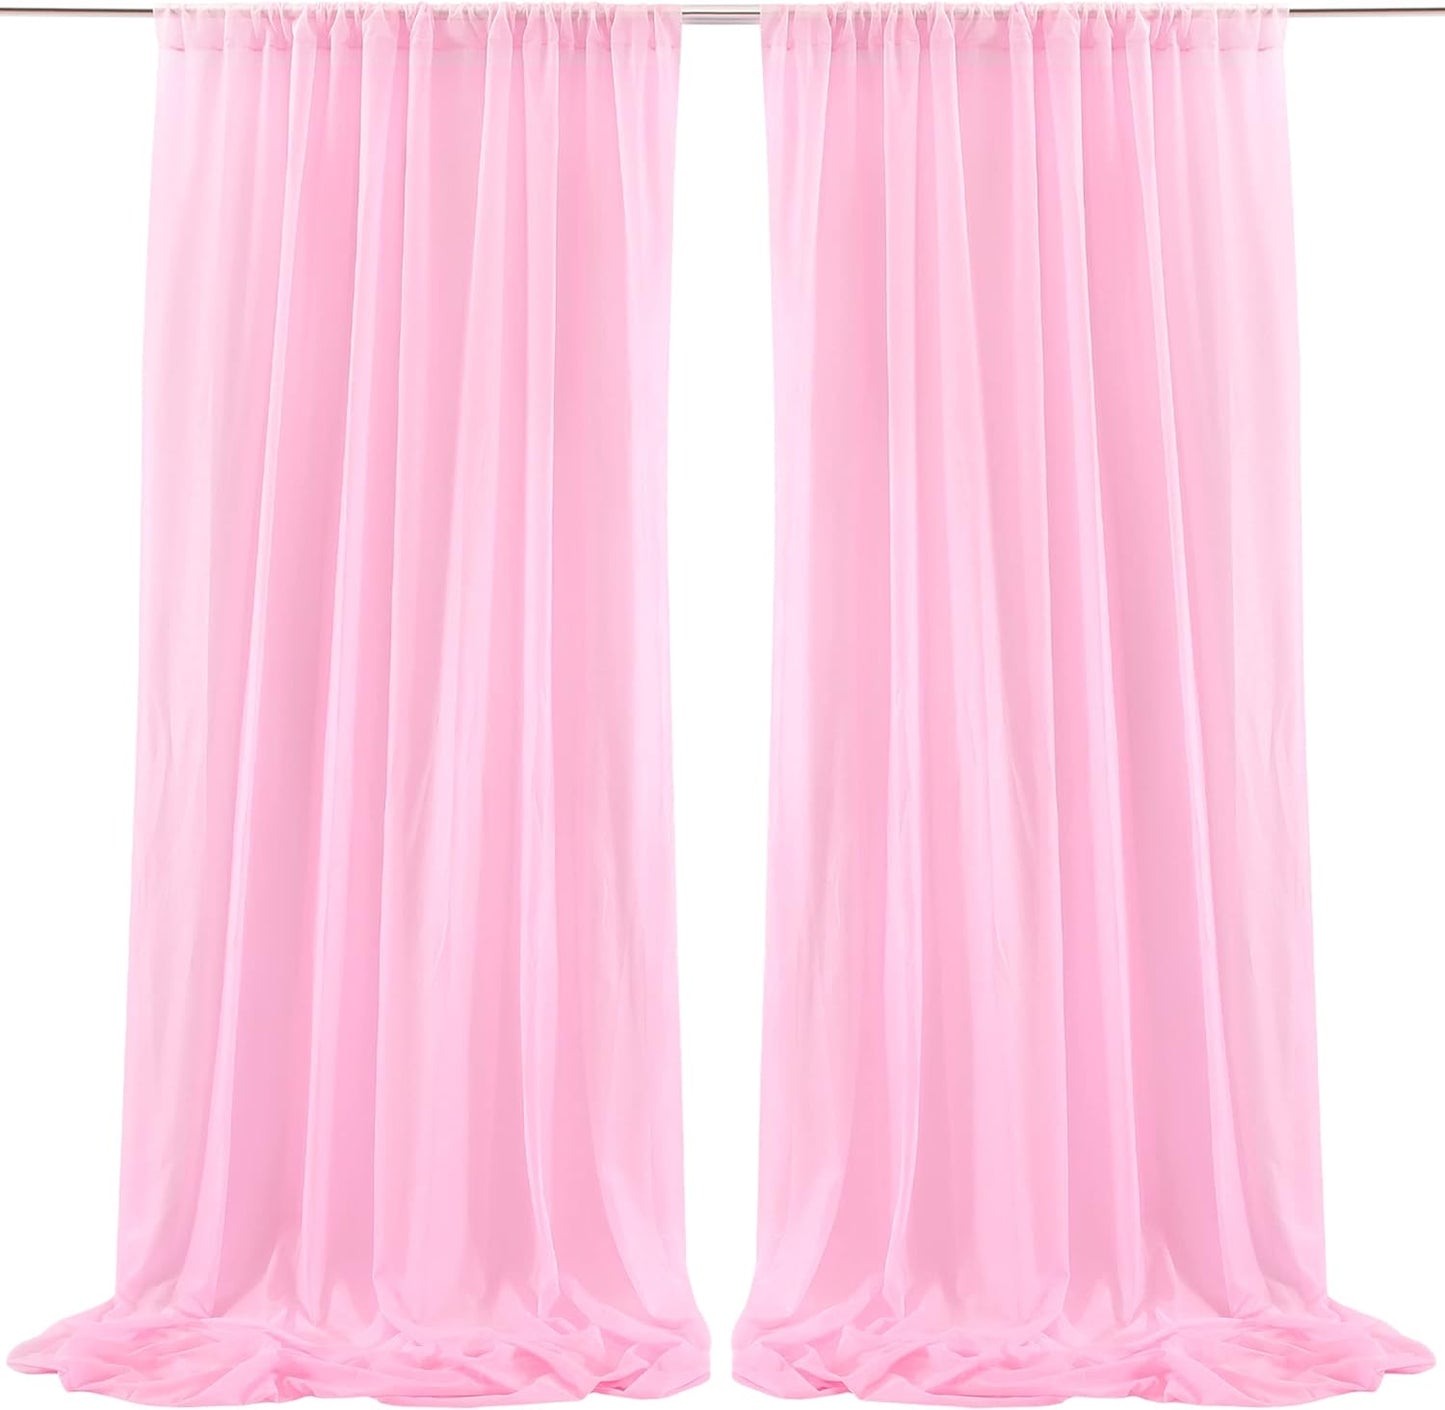 10Ft X 10Ft White Chiffon Backdrop Curtains, Wrinkle-Free Sheer Chiffon Fabric Curtain Drapes for Wedding Ceremony Arch Party Stage Decoration  Wish Care Pink  